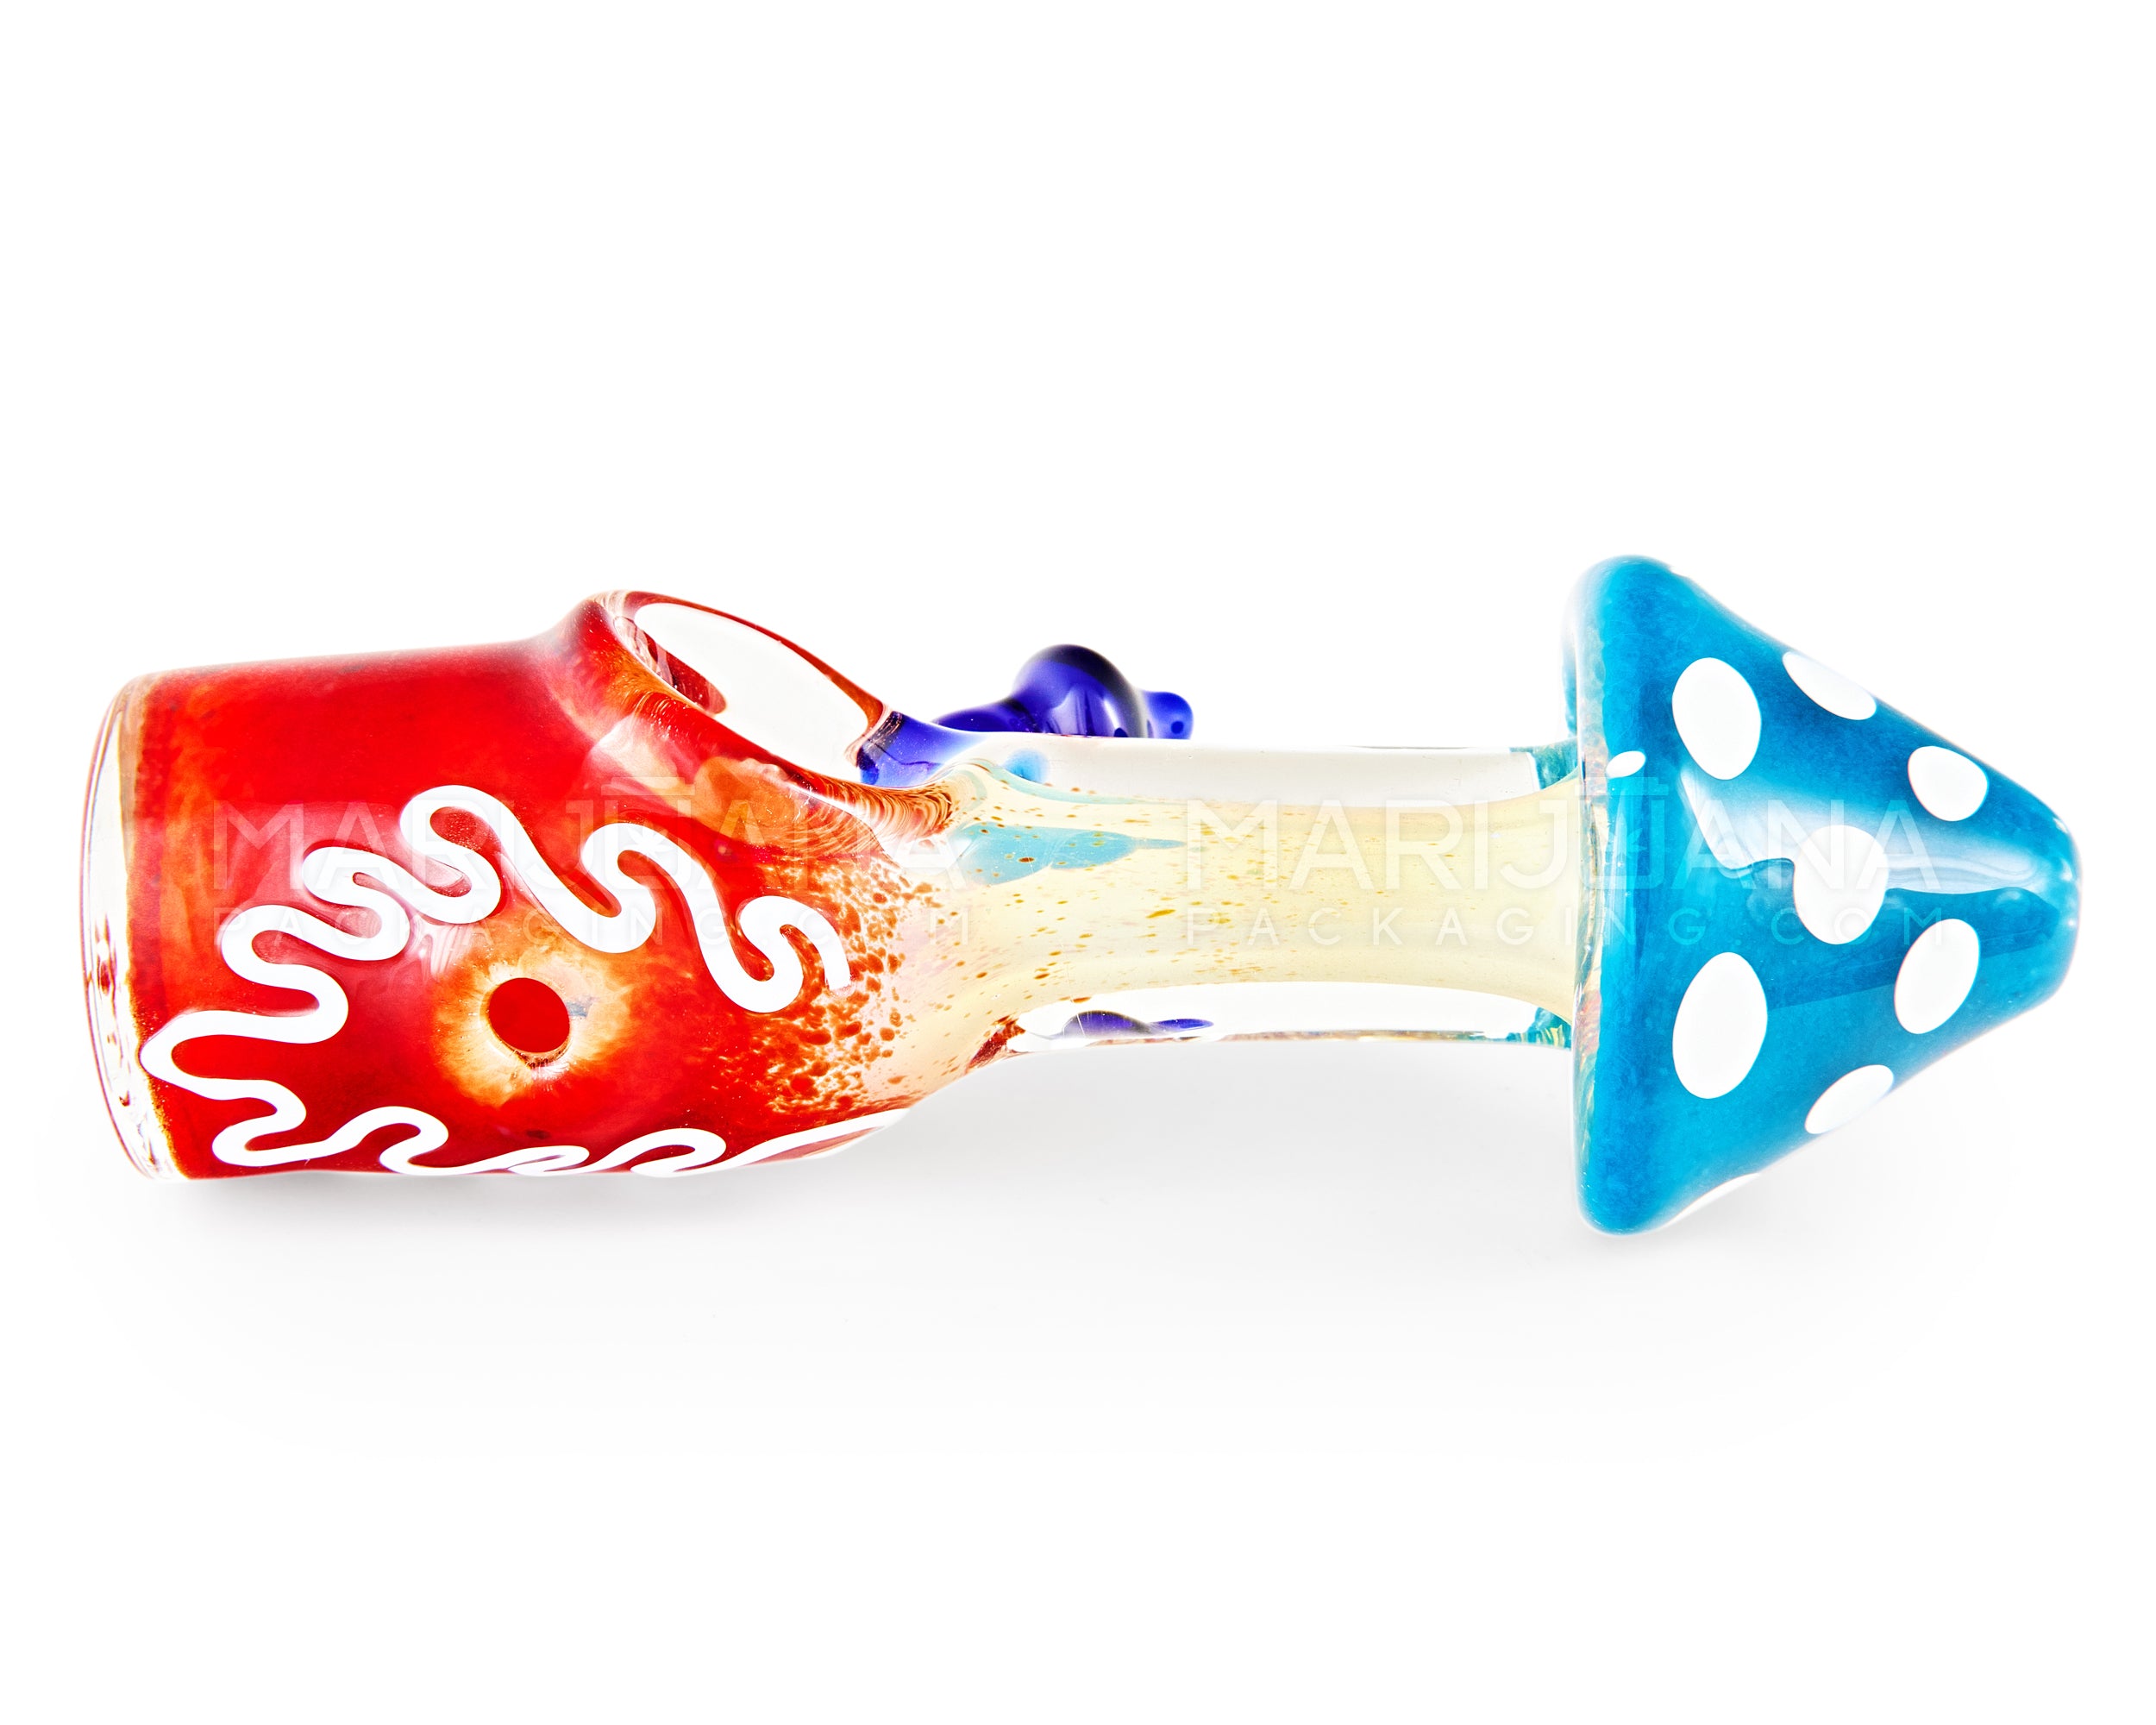 Frit & Gold Fumed Mushroom Hand Pipe w/ Swirls & Glass Handle | 5in Long - Glass - Mixed - 6